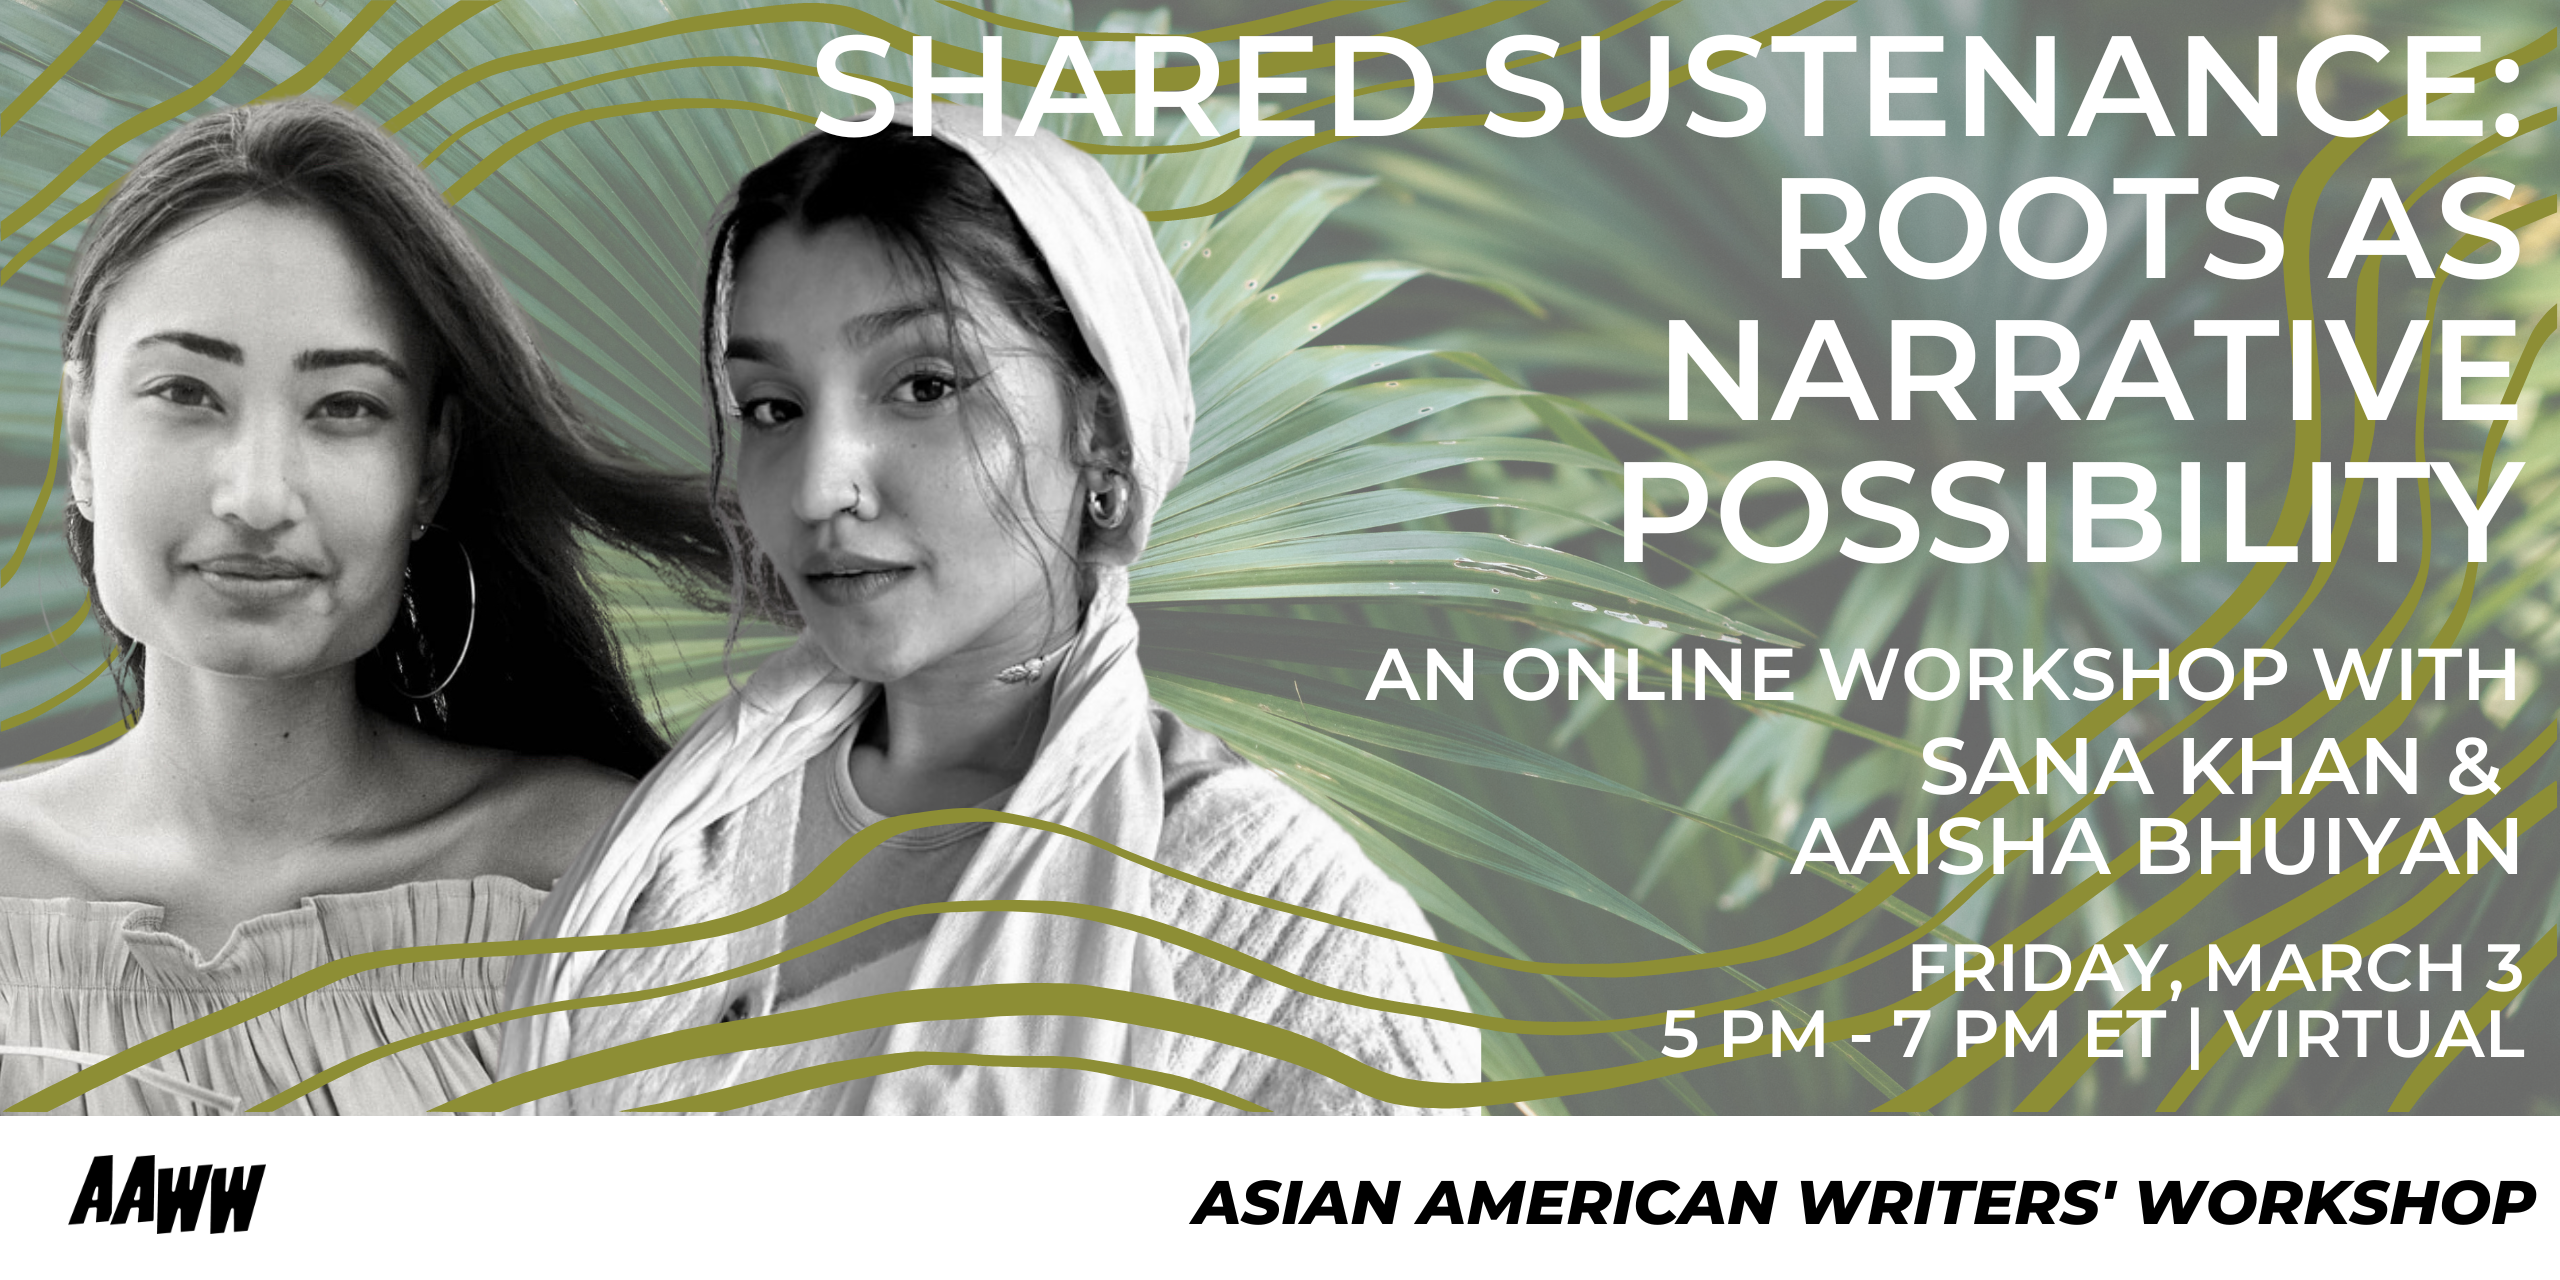 [VIRTUAL WORKSHOP] Shared Sustenance: Roots as Narrative Possibility